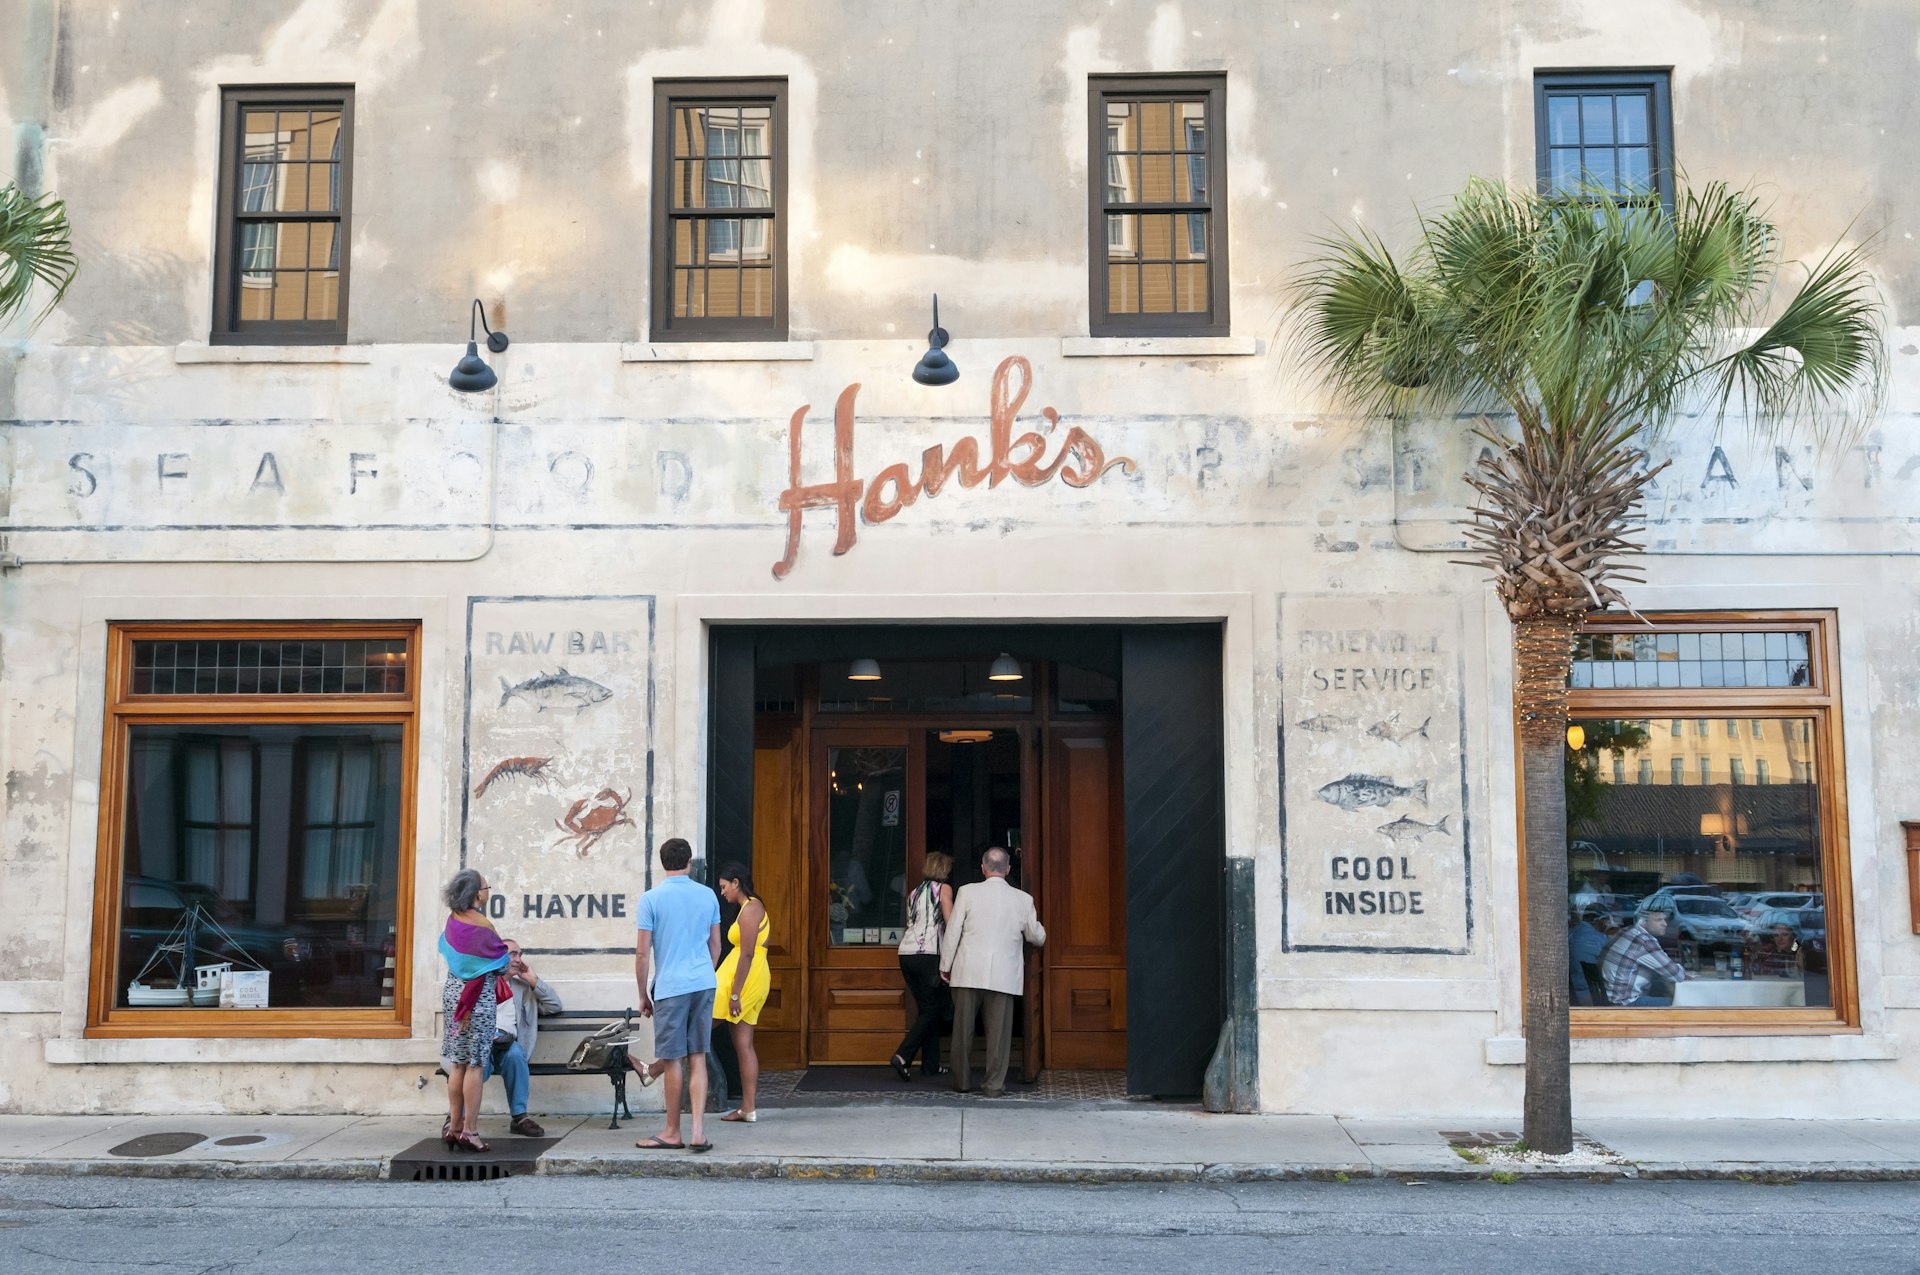 The exterior of Hank's Seafood Restaurant in Charleston, SC